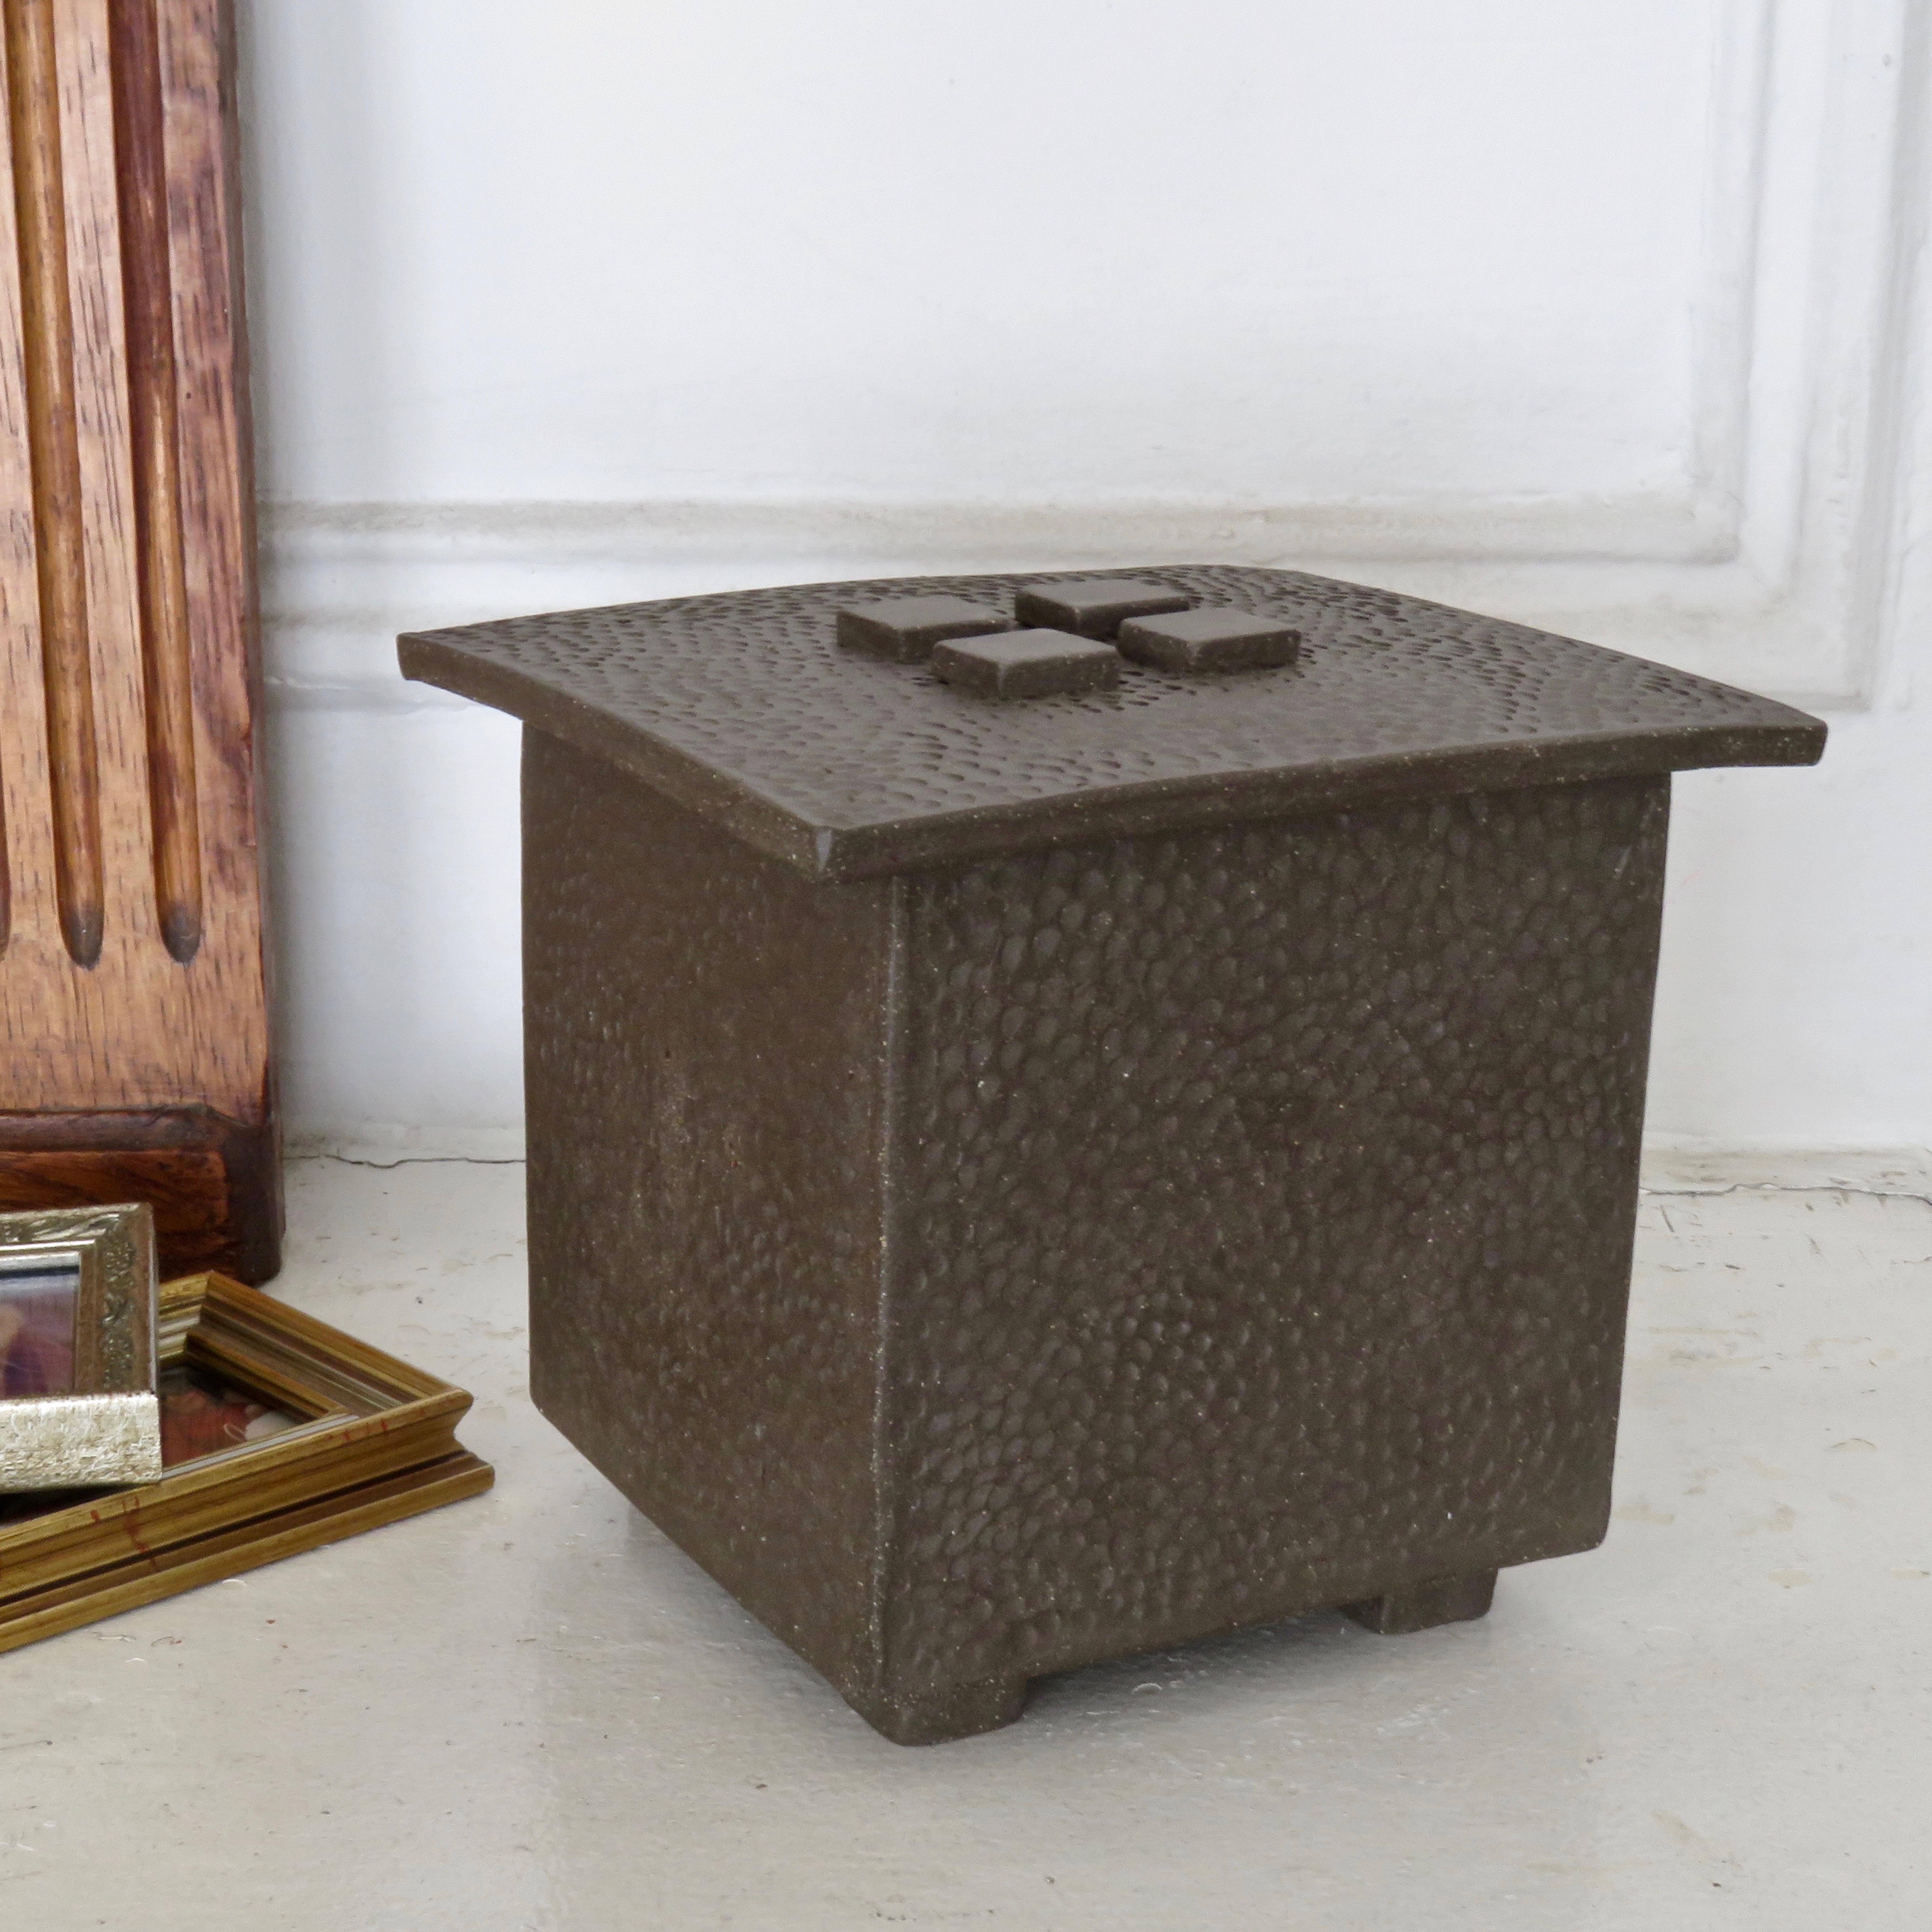 American Hand-Textured Box in Raw Brown Clay with Orange Glazed Interior and Lid